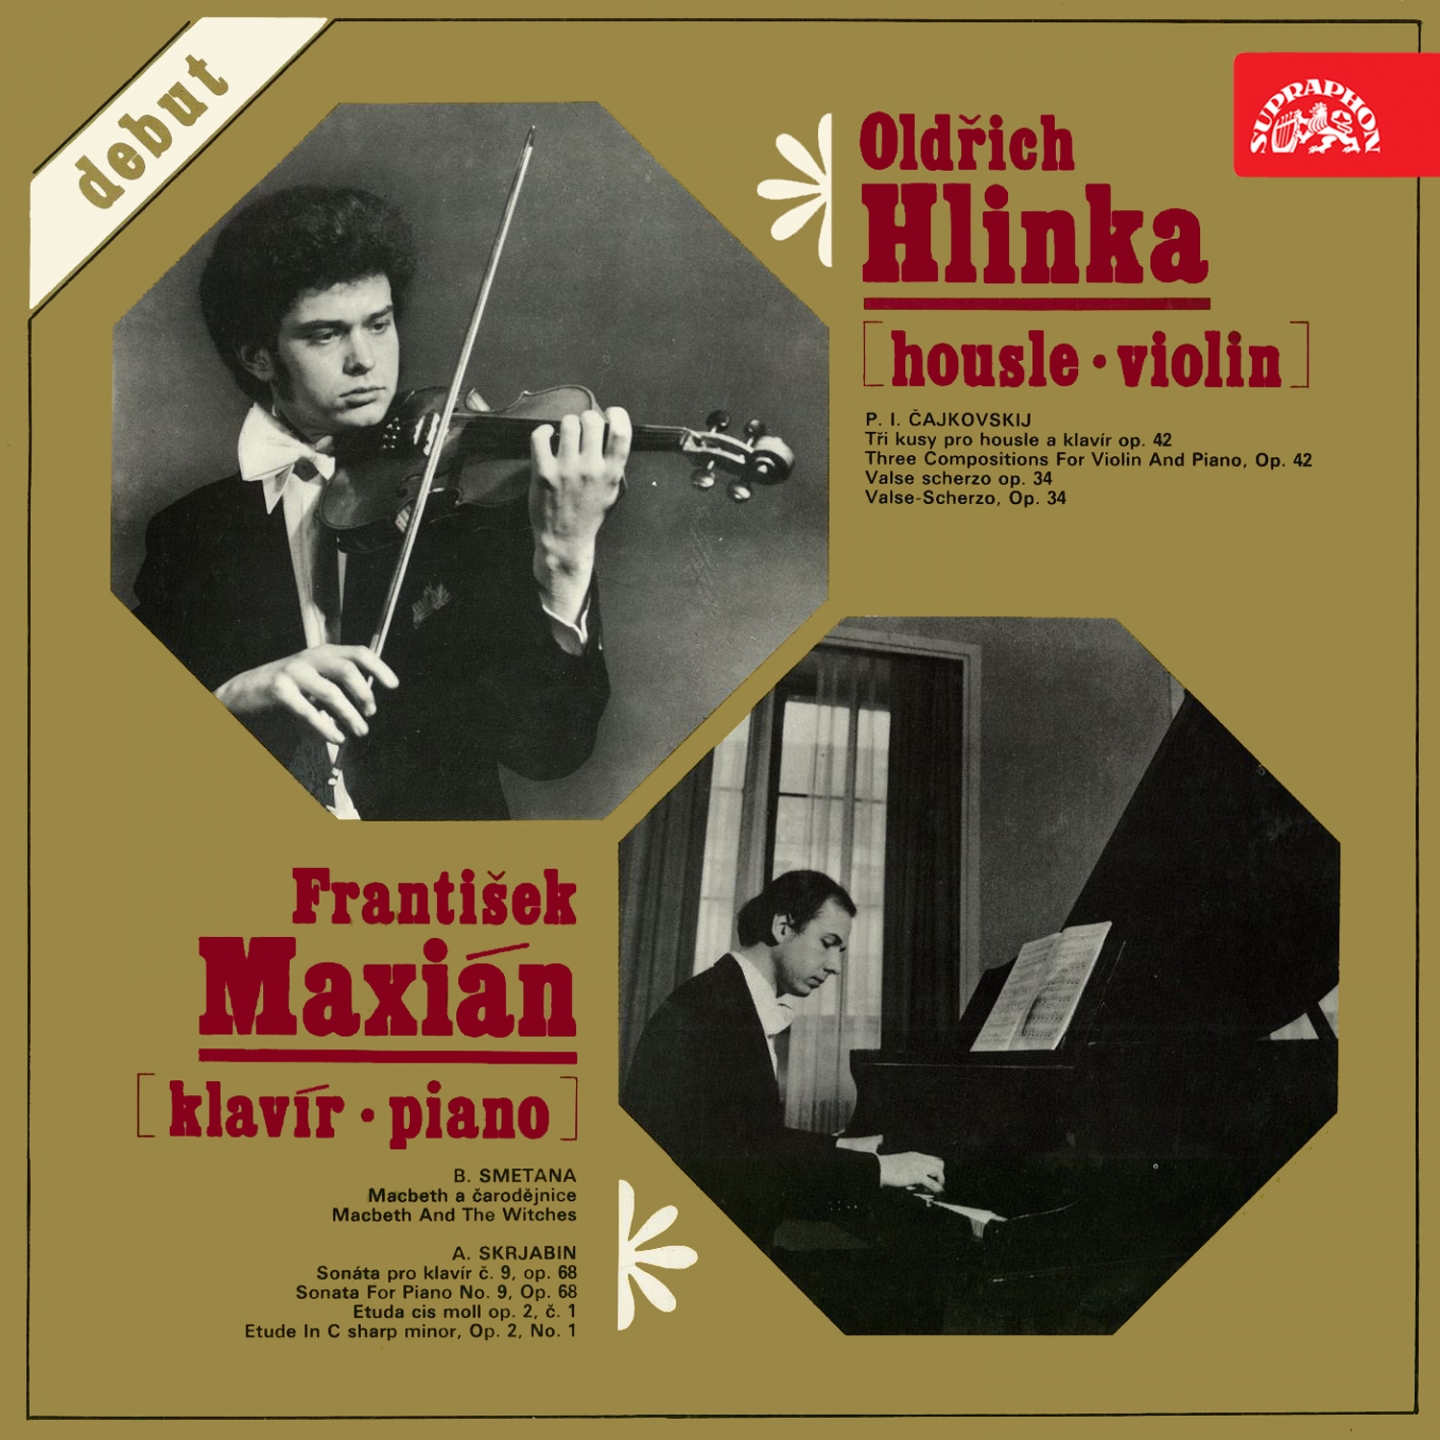 Three Pieces for Violin and Piano, Op. 42, .: Melody